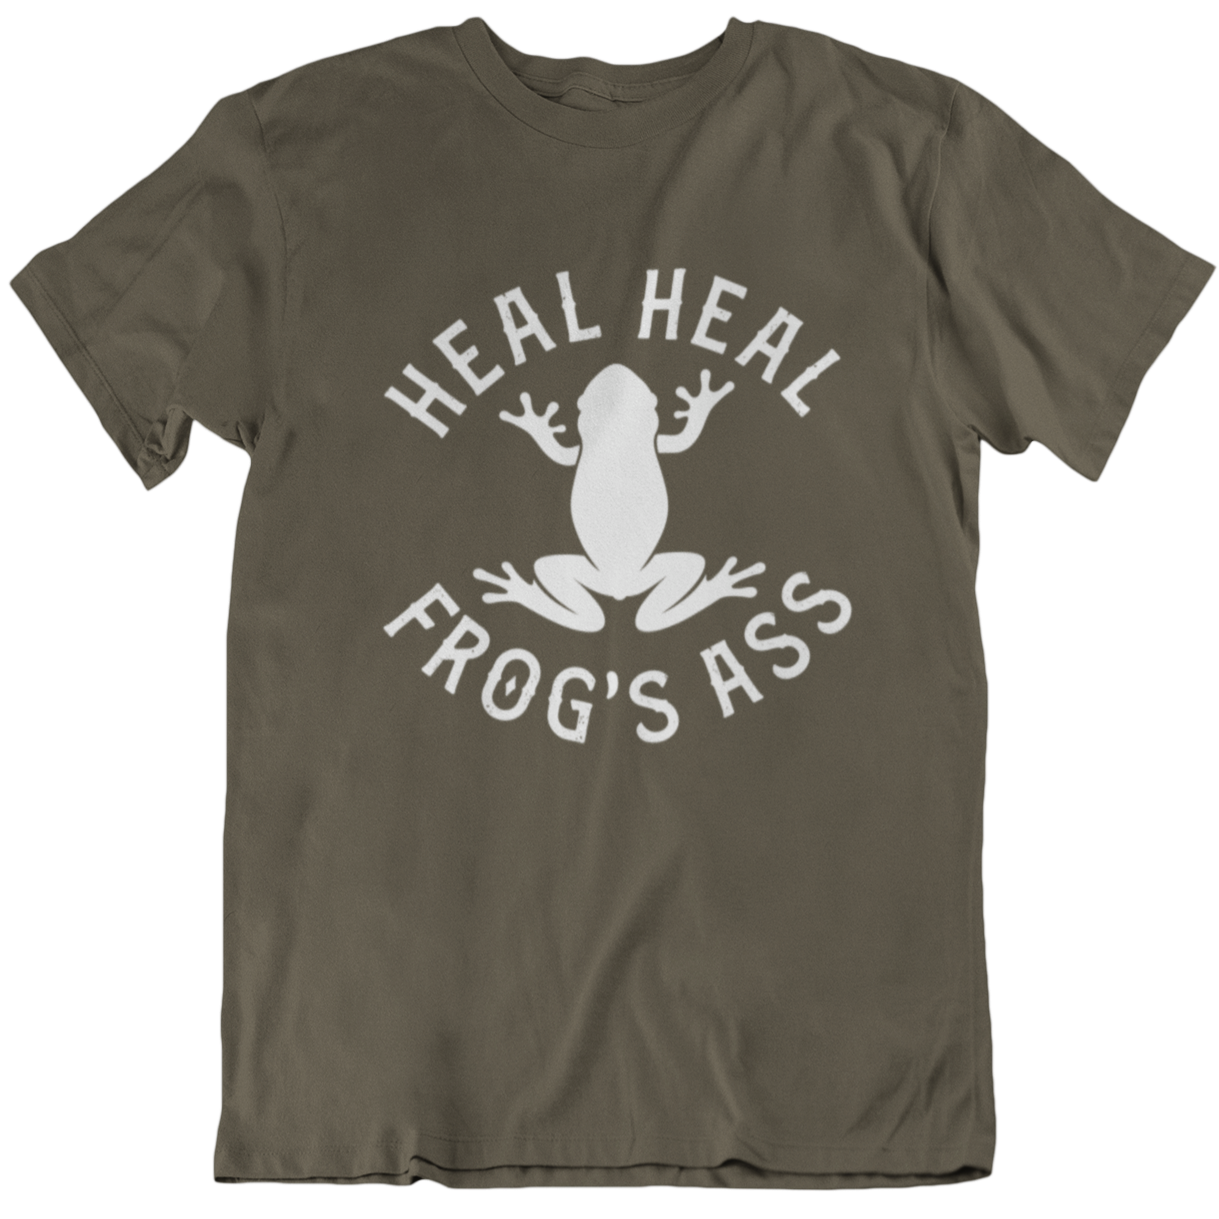 funny army green t-shirt for Latino culture. the graphic depicts a frog and the words "heal heal frog's ass" in honor of sana sana colita de Rana